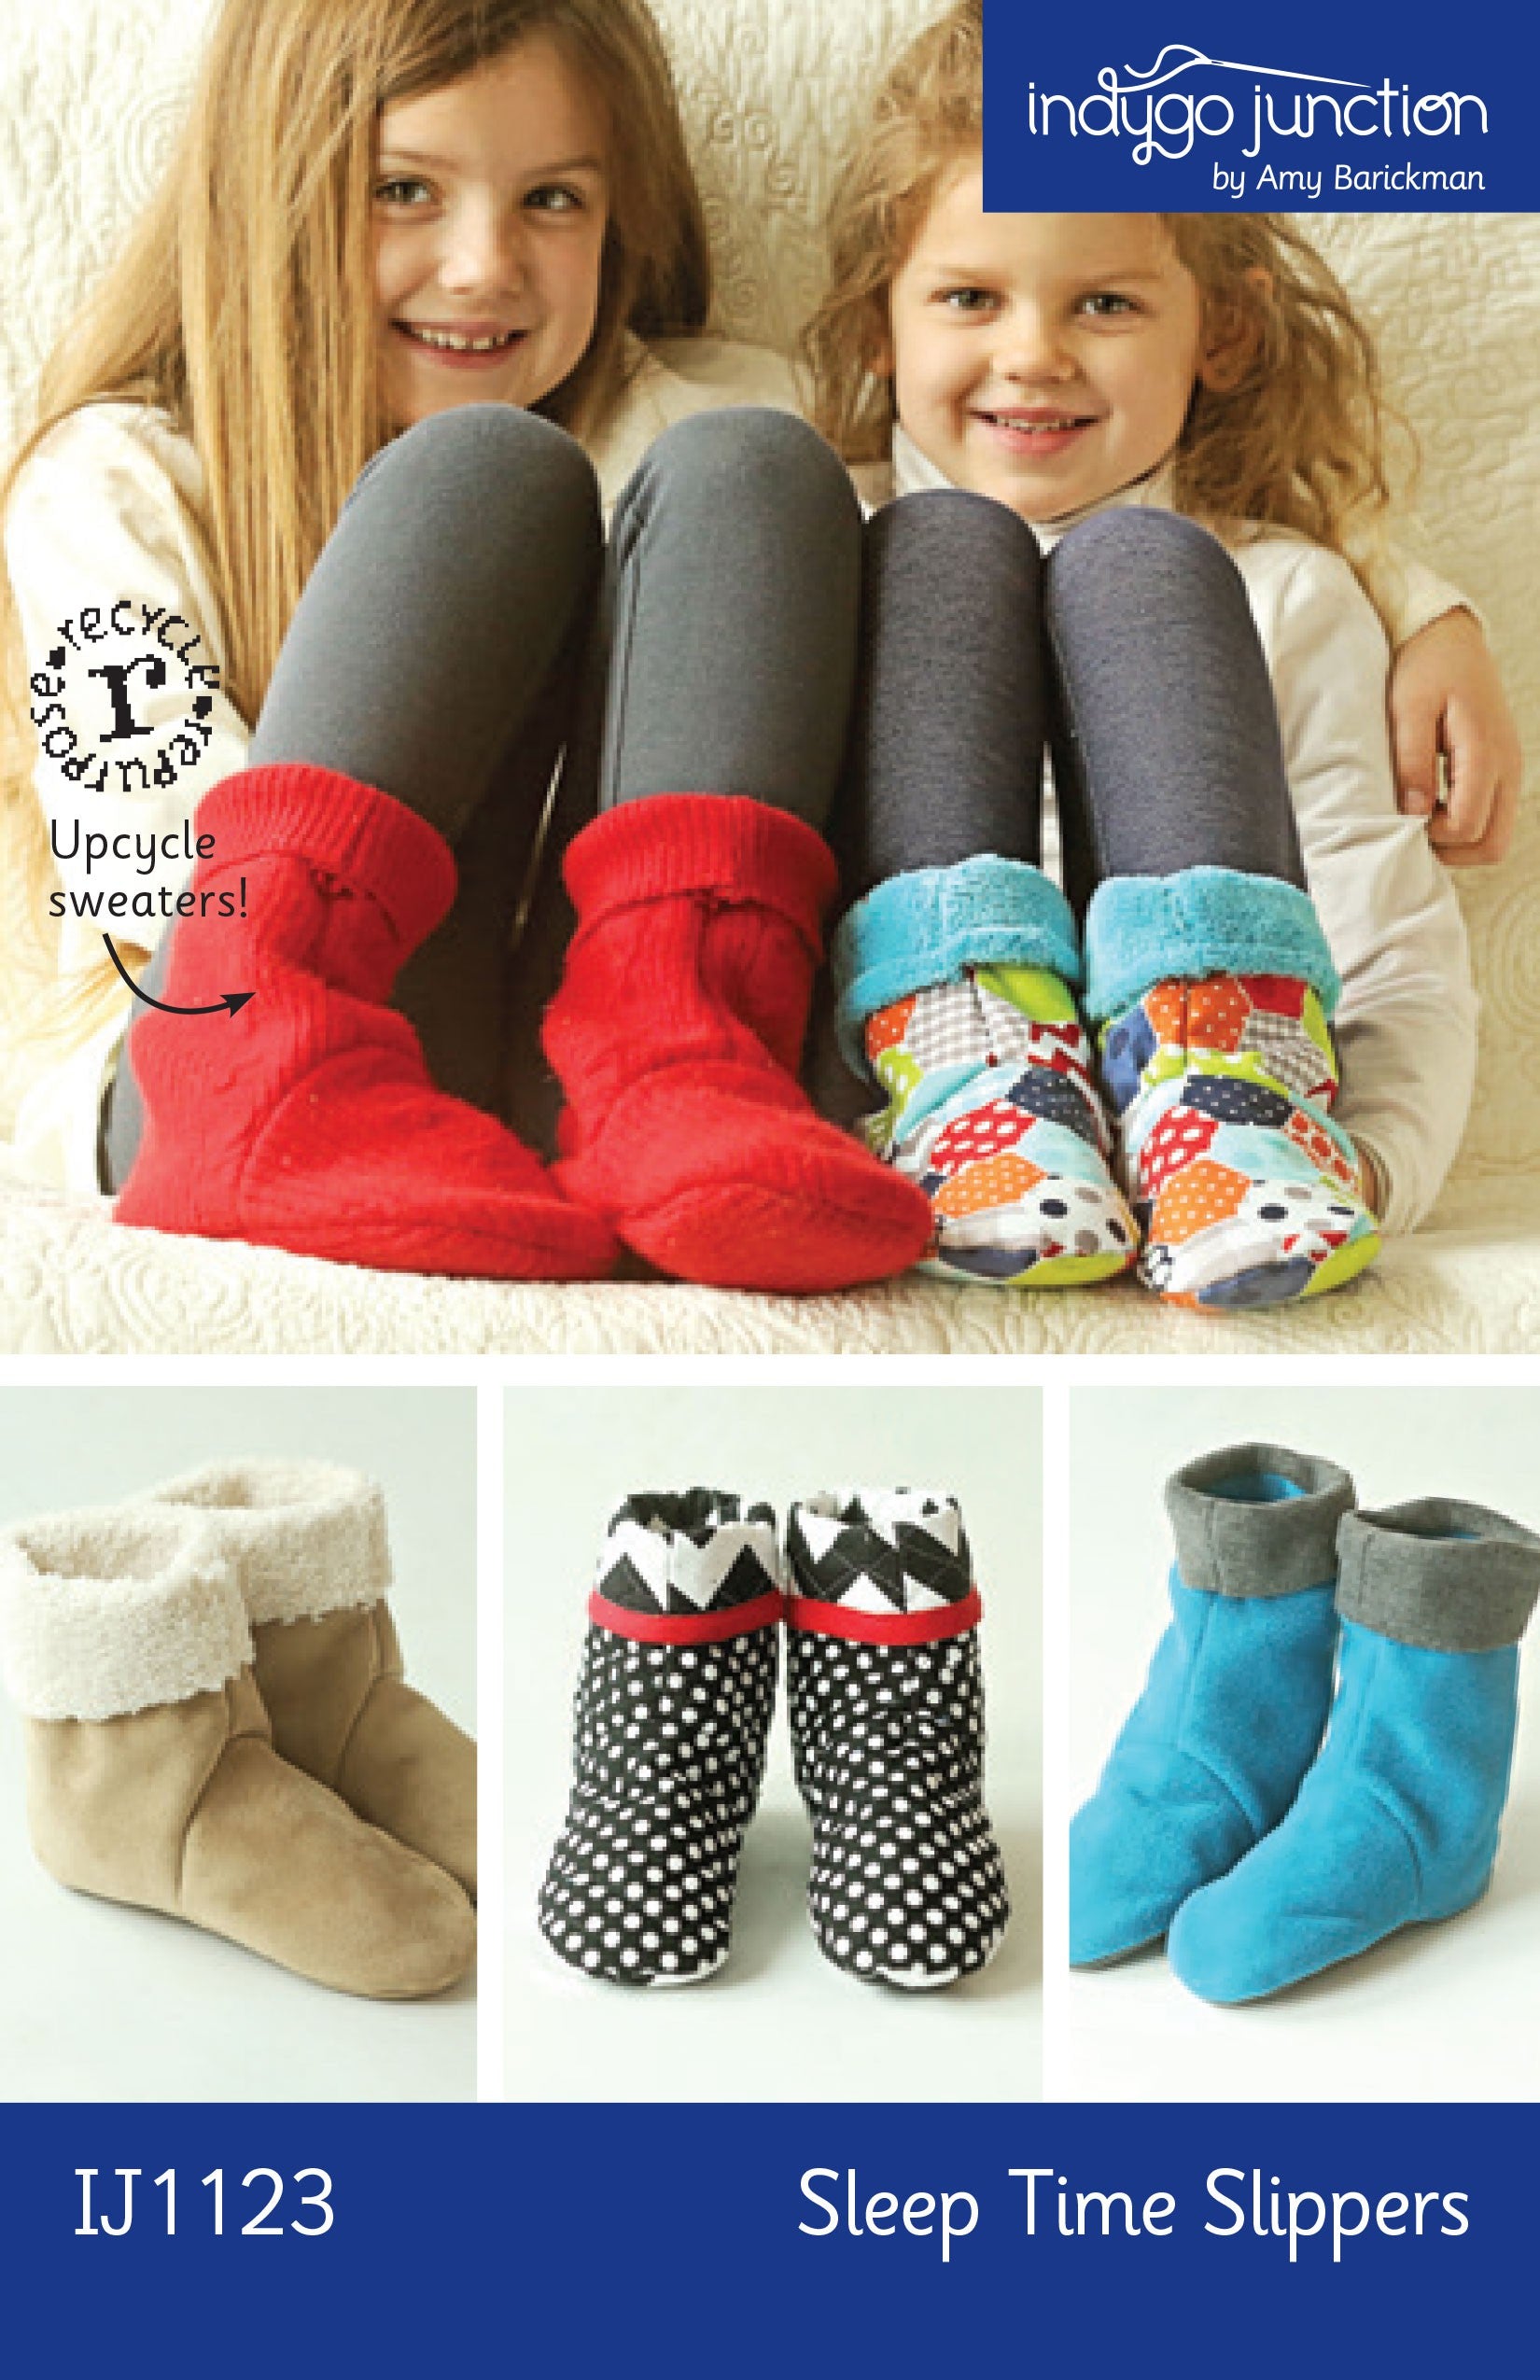 Sleep Time Slippers Sewing Pattern by Amy Barickman of Indygo Junction